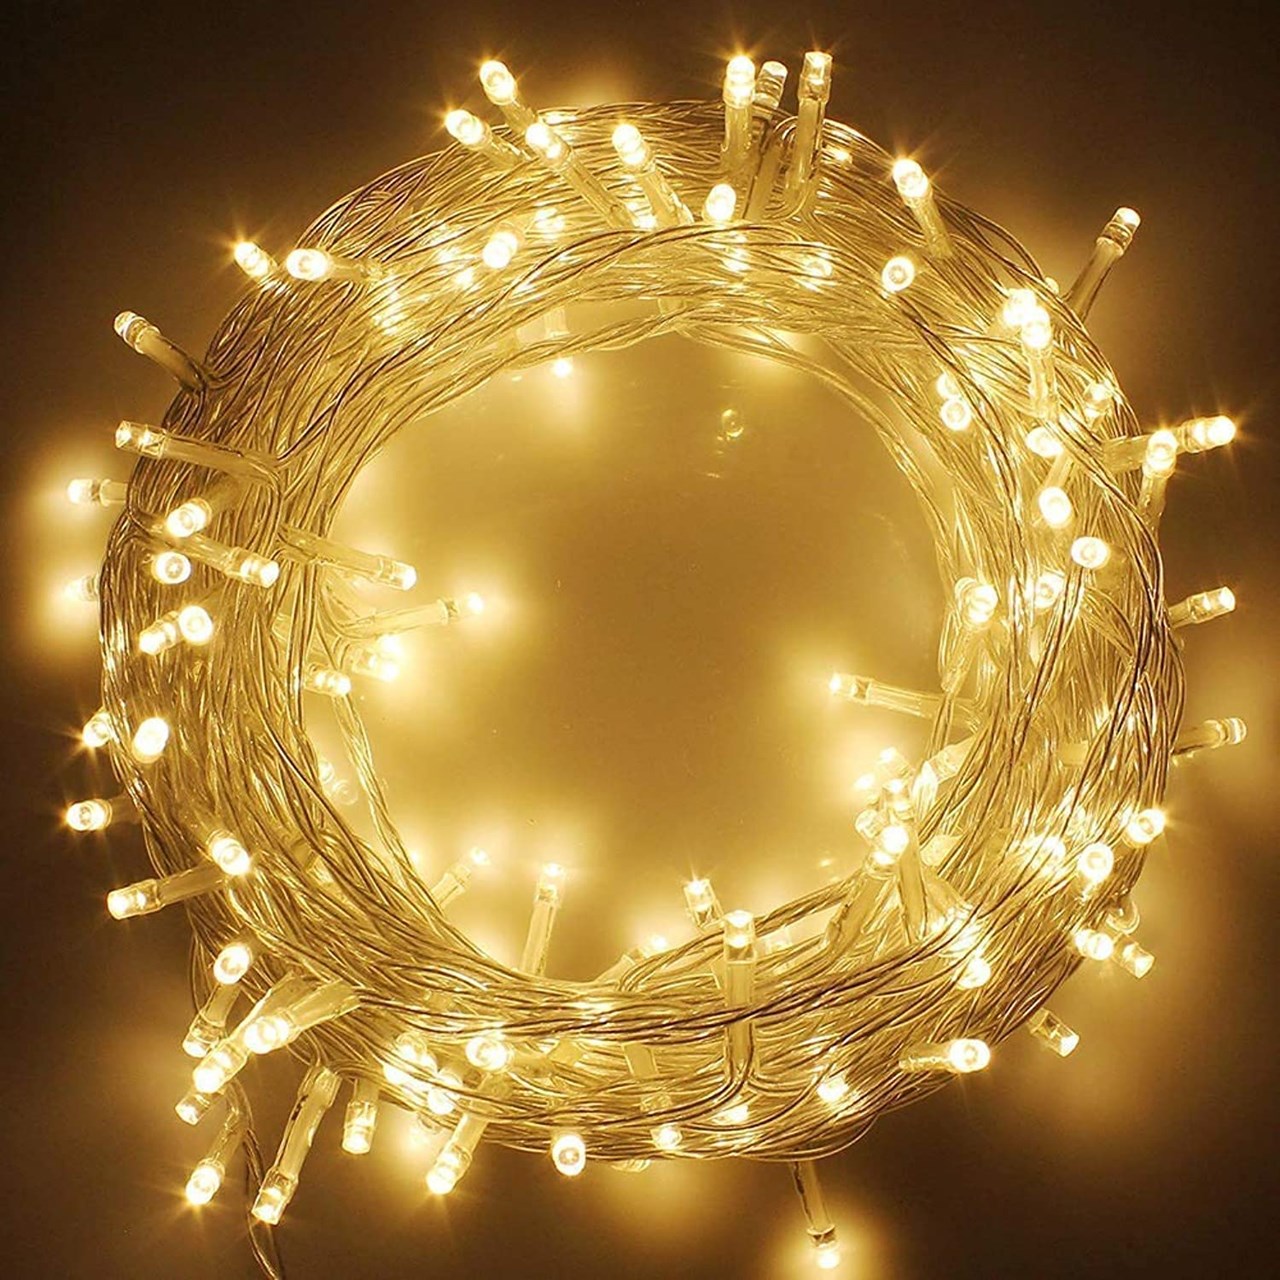 Picture of Led Rice Light for Decoration String and Series Light for Diwali Christmas Indoor Outdoor Decoration Bedroom Wedding, Birthday Party,7.5meter.